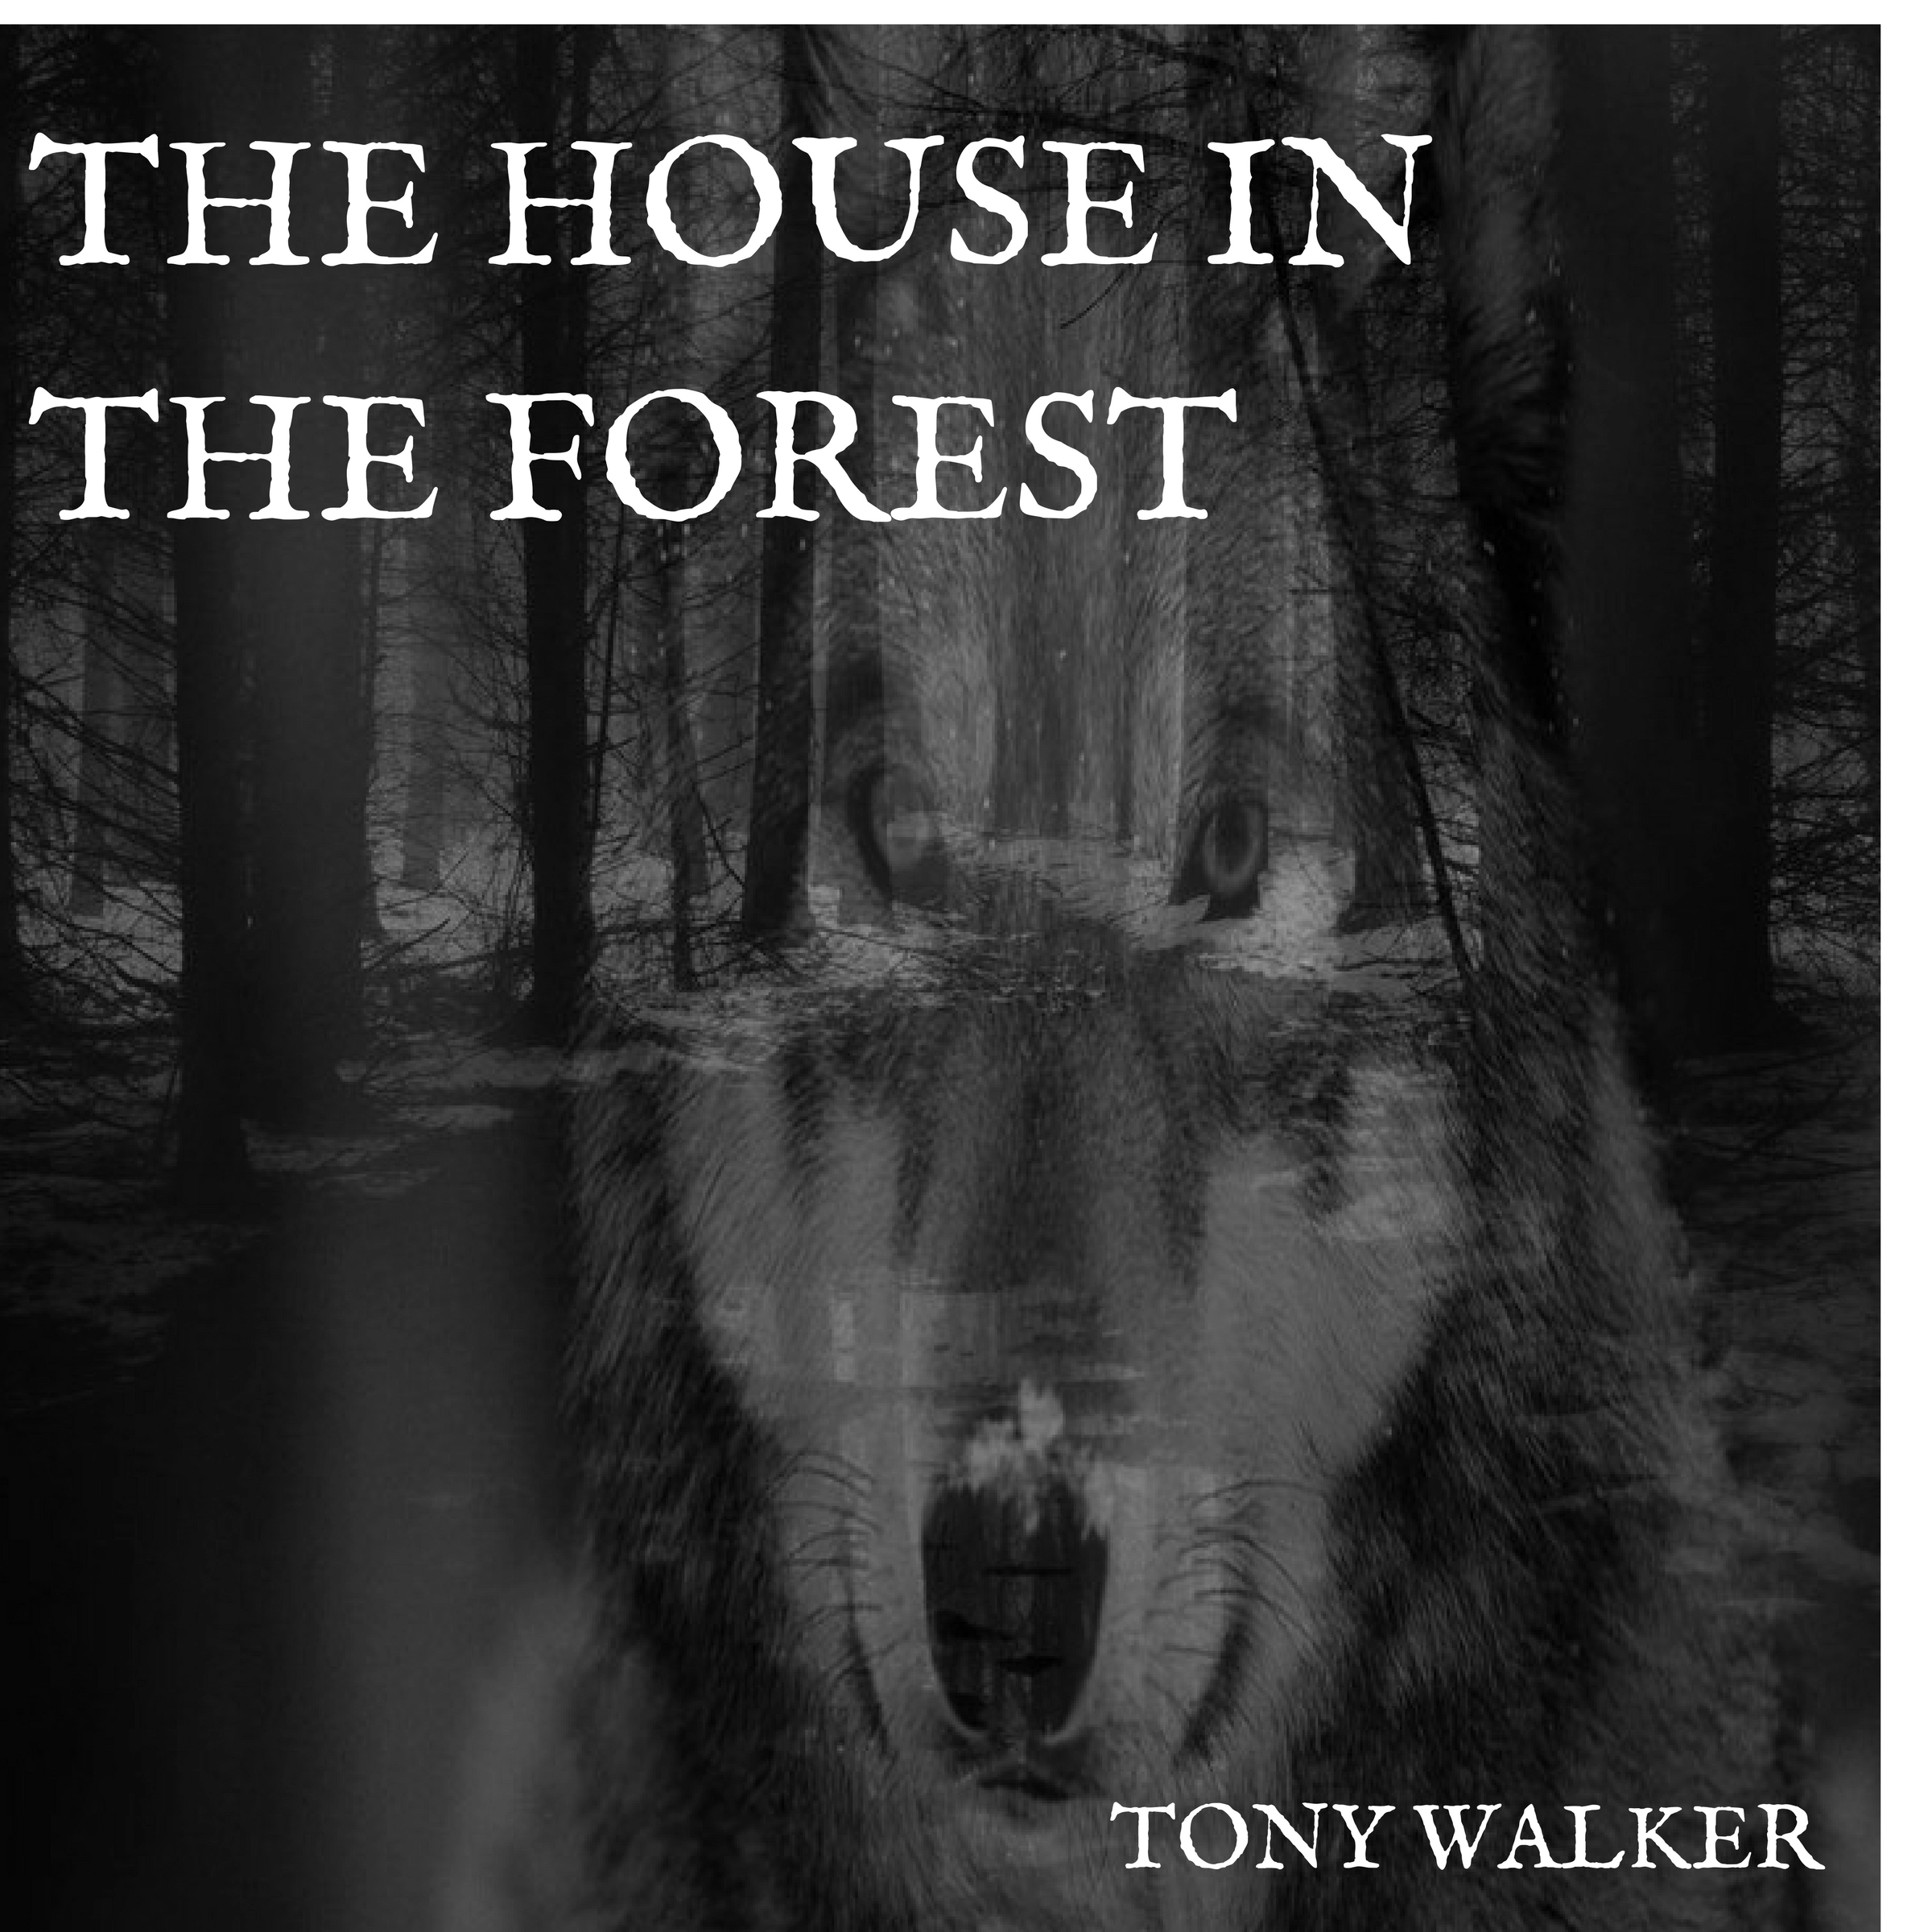 The House in the Forest by Tony Walker Audiobook